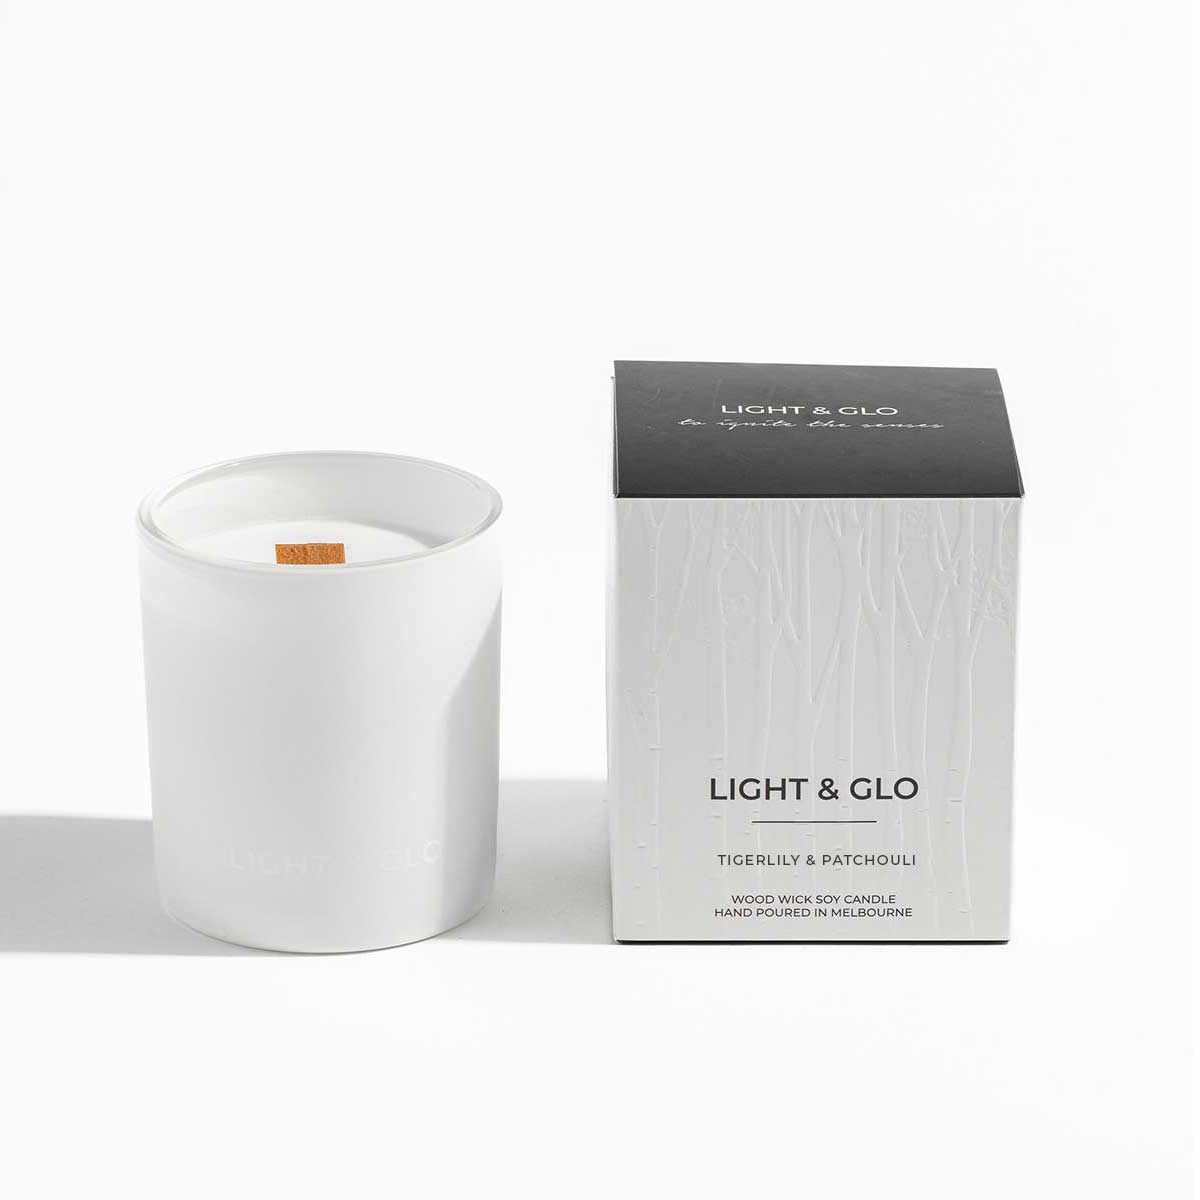 Tiger Lily & Patchouli - Monochrome Large 300g Candle | Luxury Candles & Home Fragrances by Light + Glo